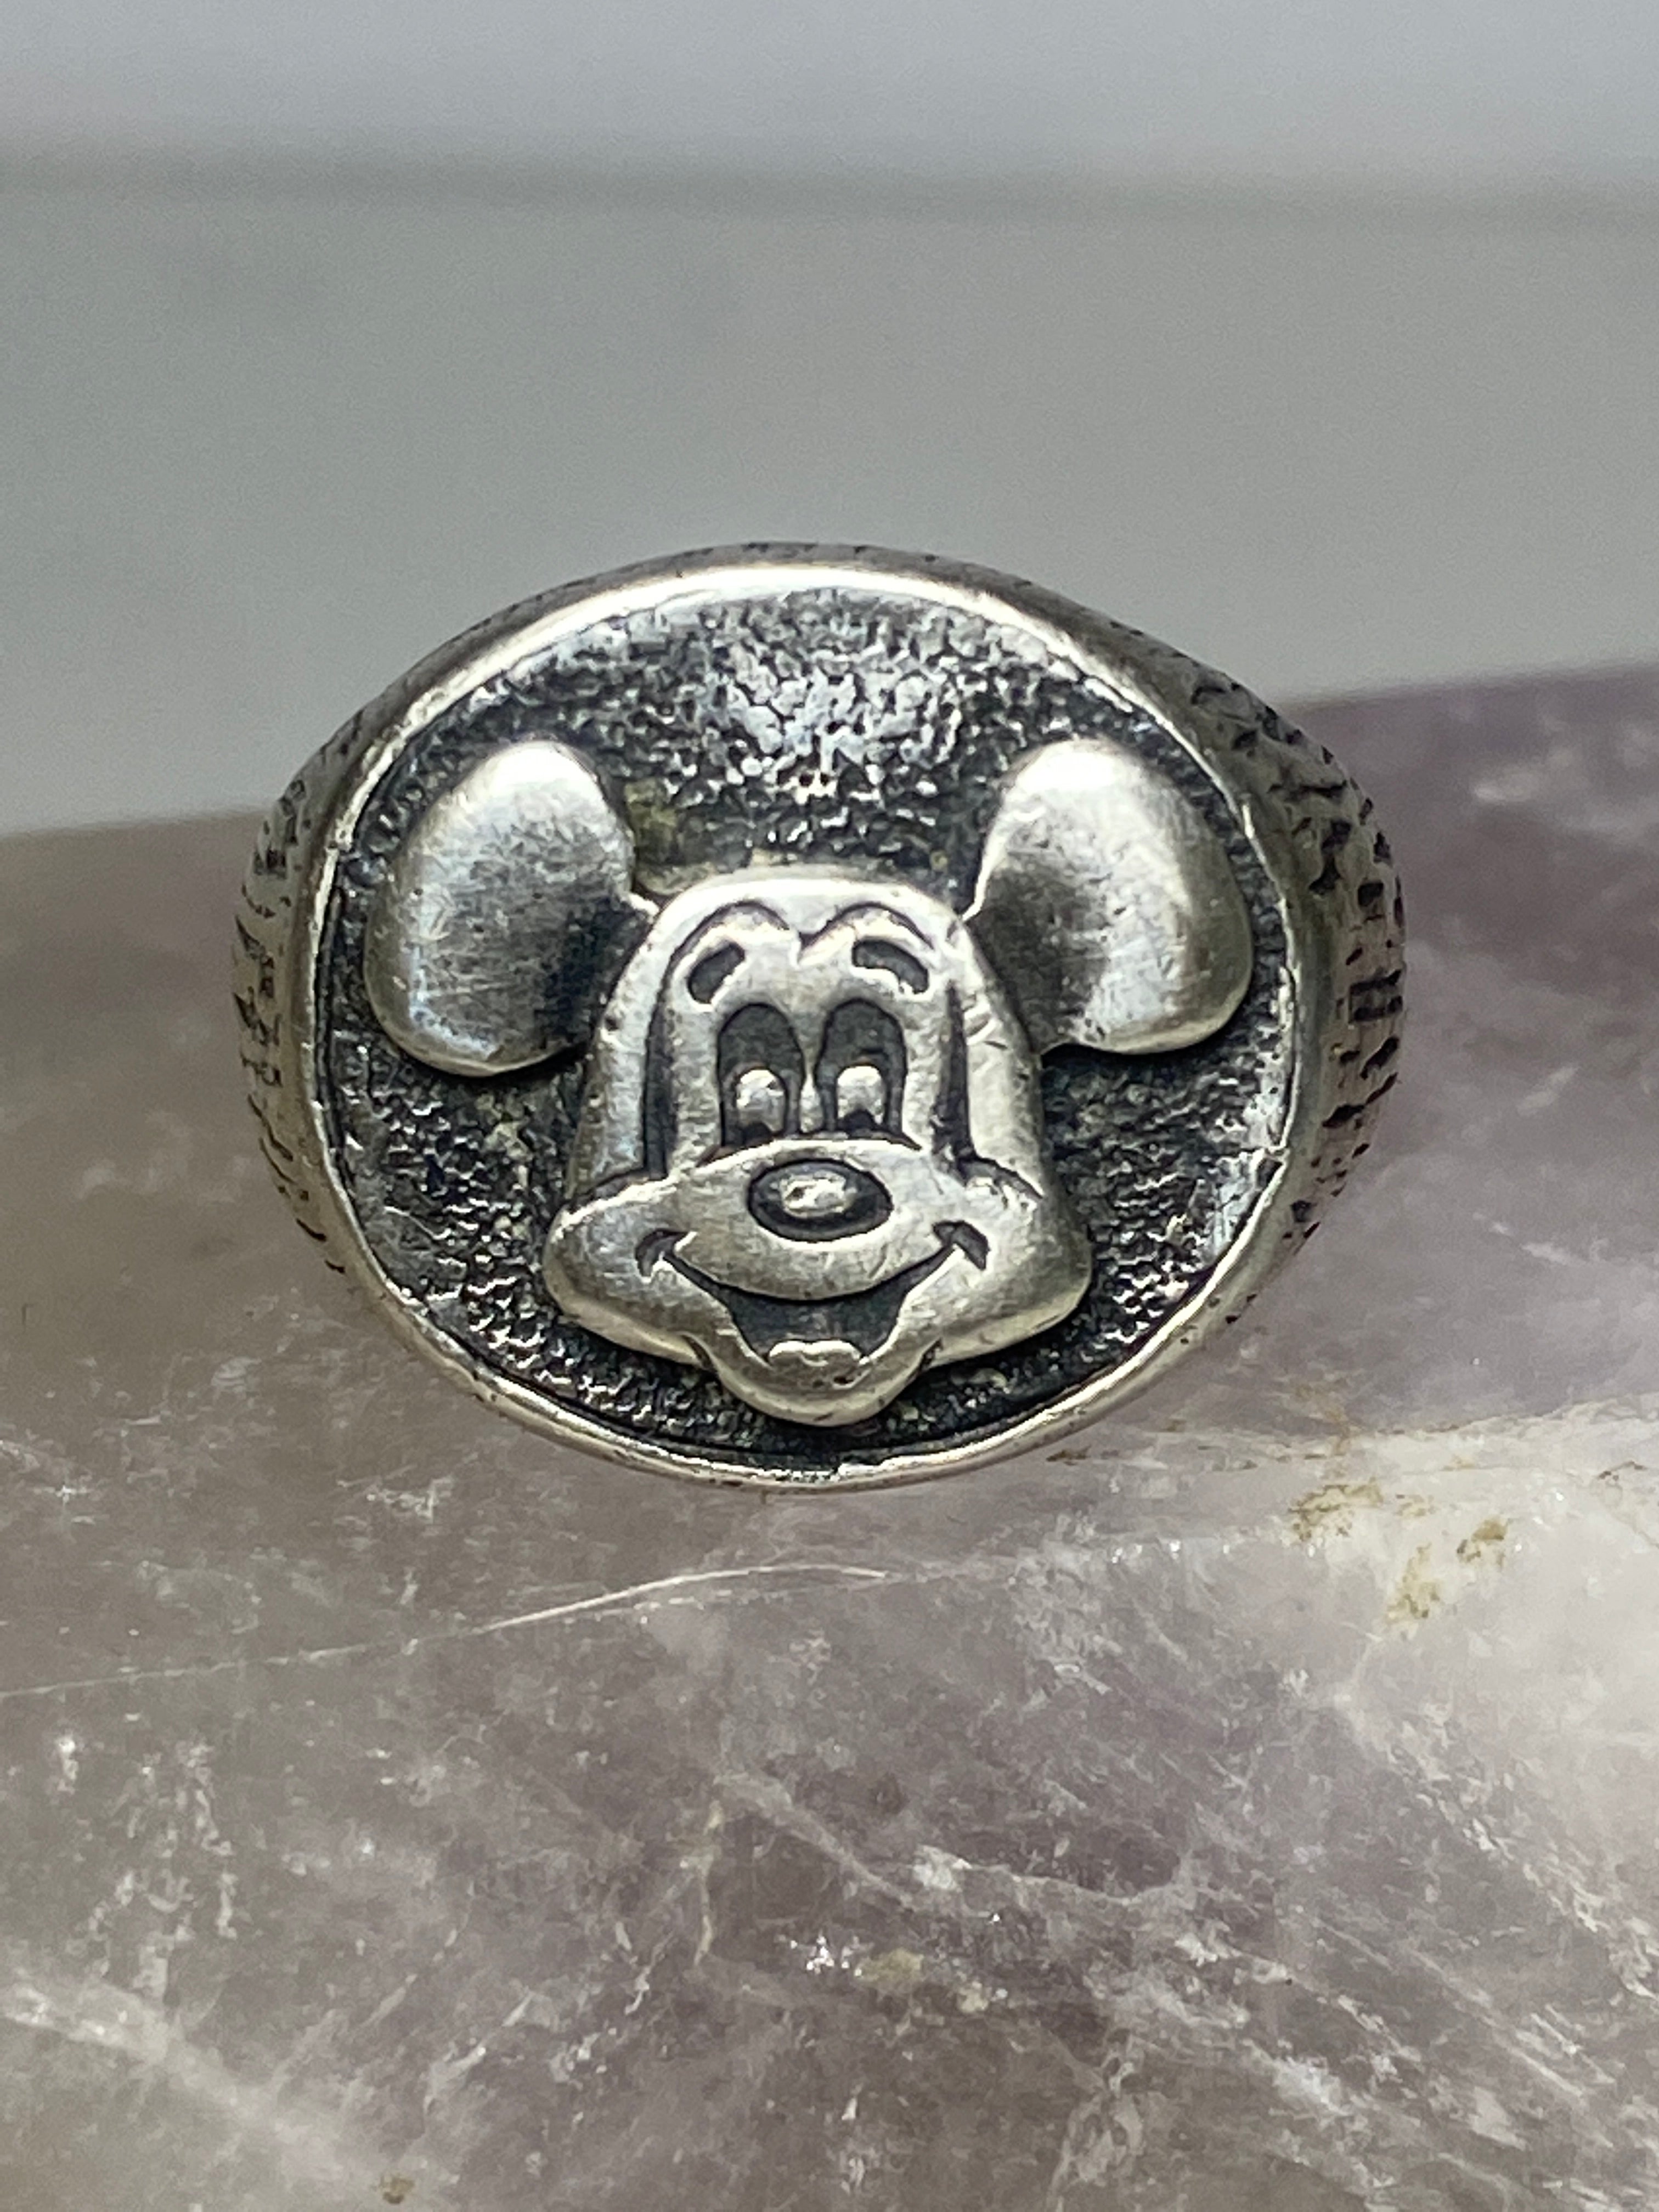  Mickey Mouse Ring